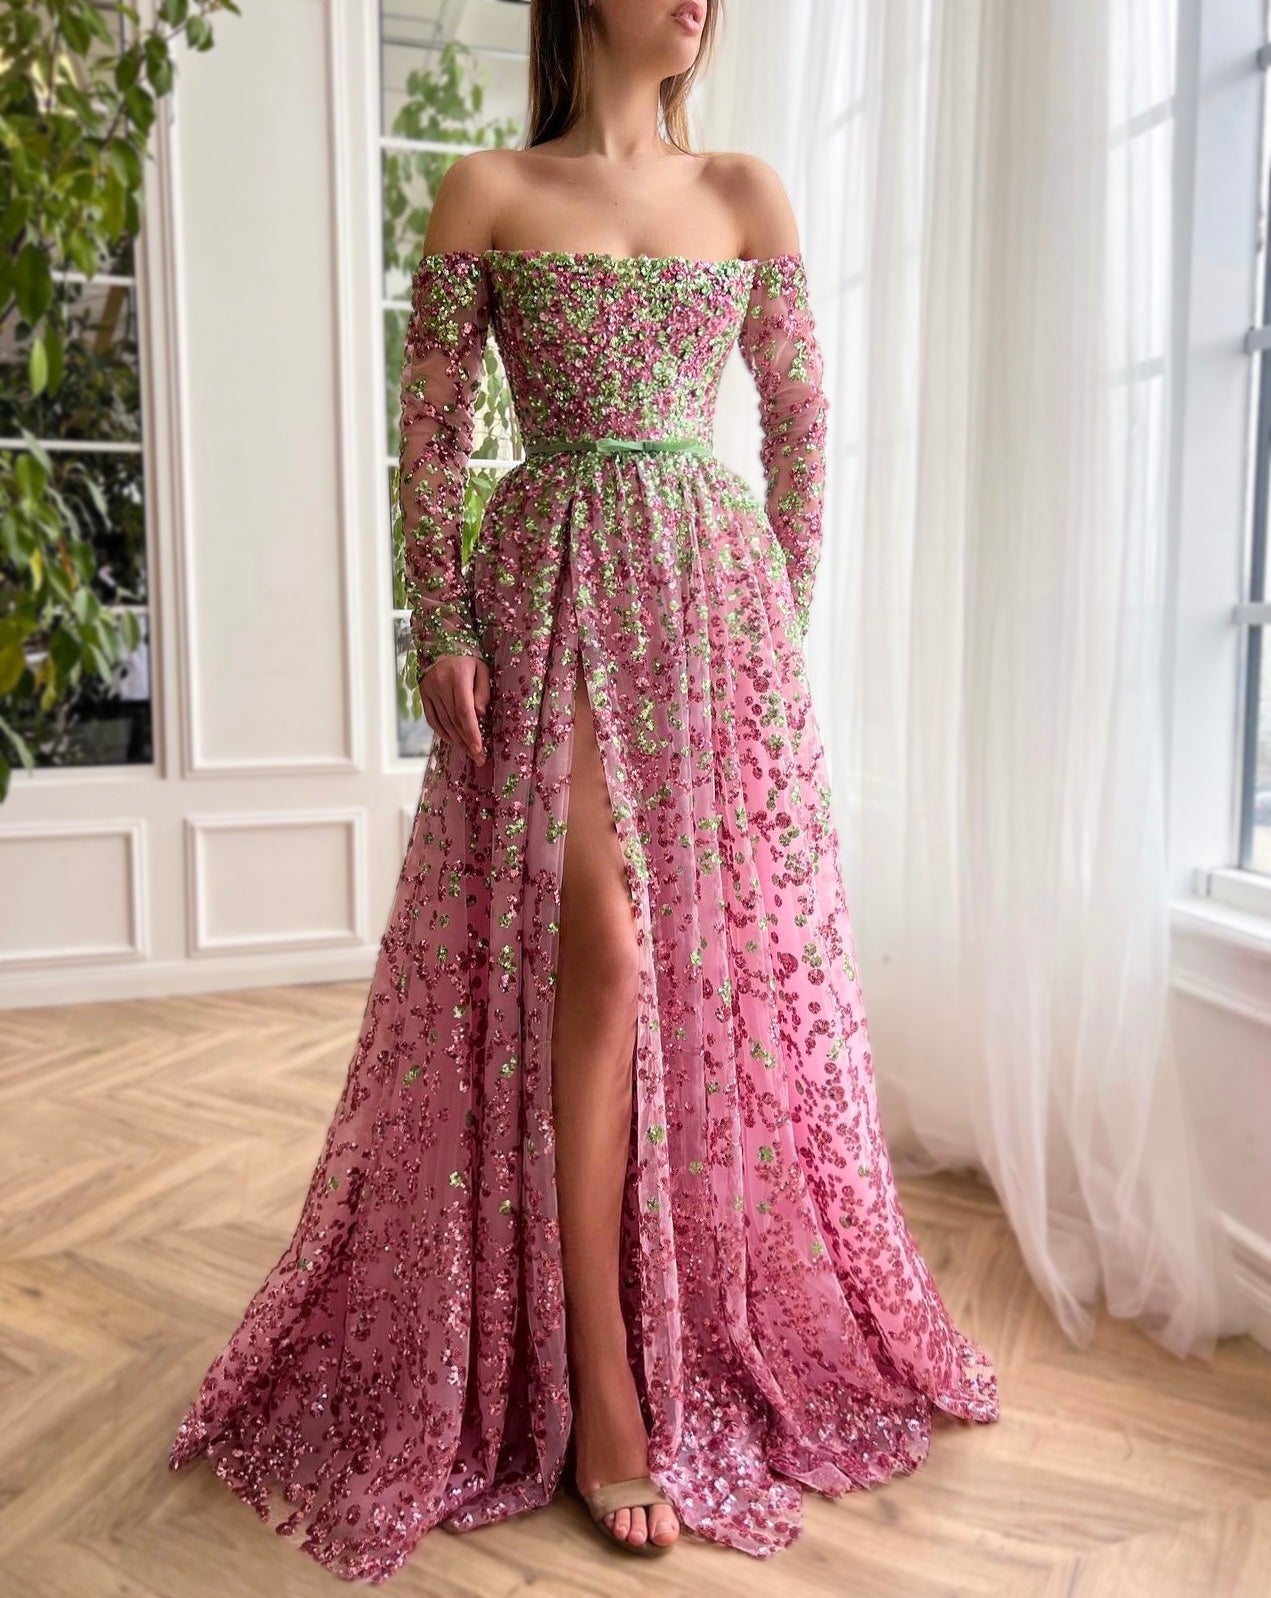 Pink A-Line dress with long off the shoulder sleeves and embroidery